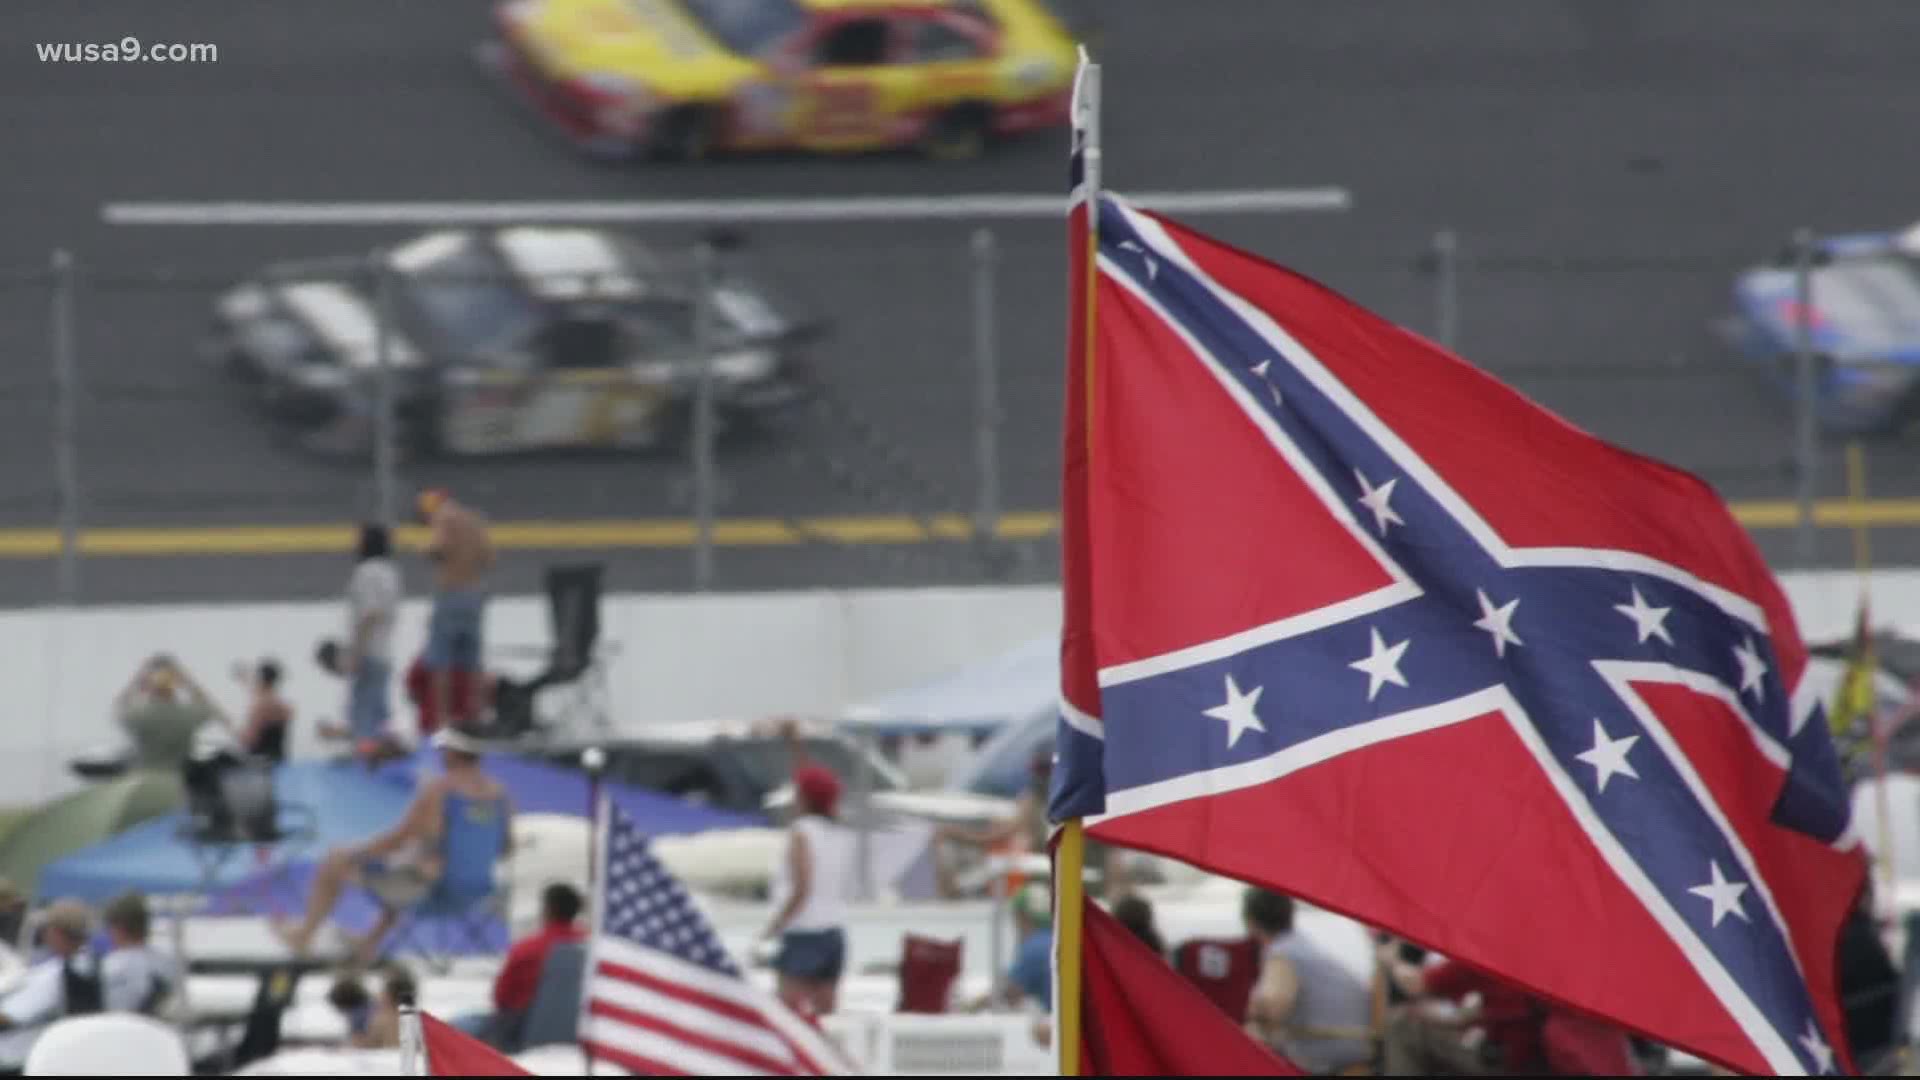 WUSA9's Sharla McBride weighs-in on banning confederate flags at races, and one driver ending his career because of NASCAR's monumental move.